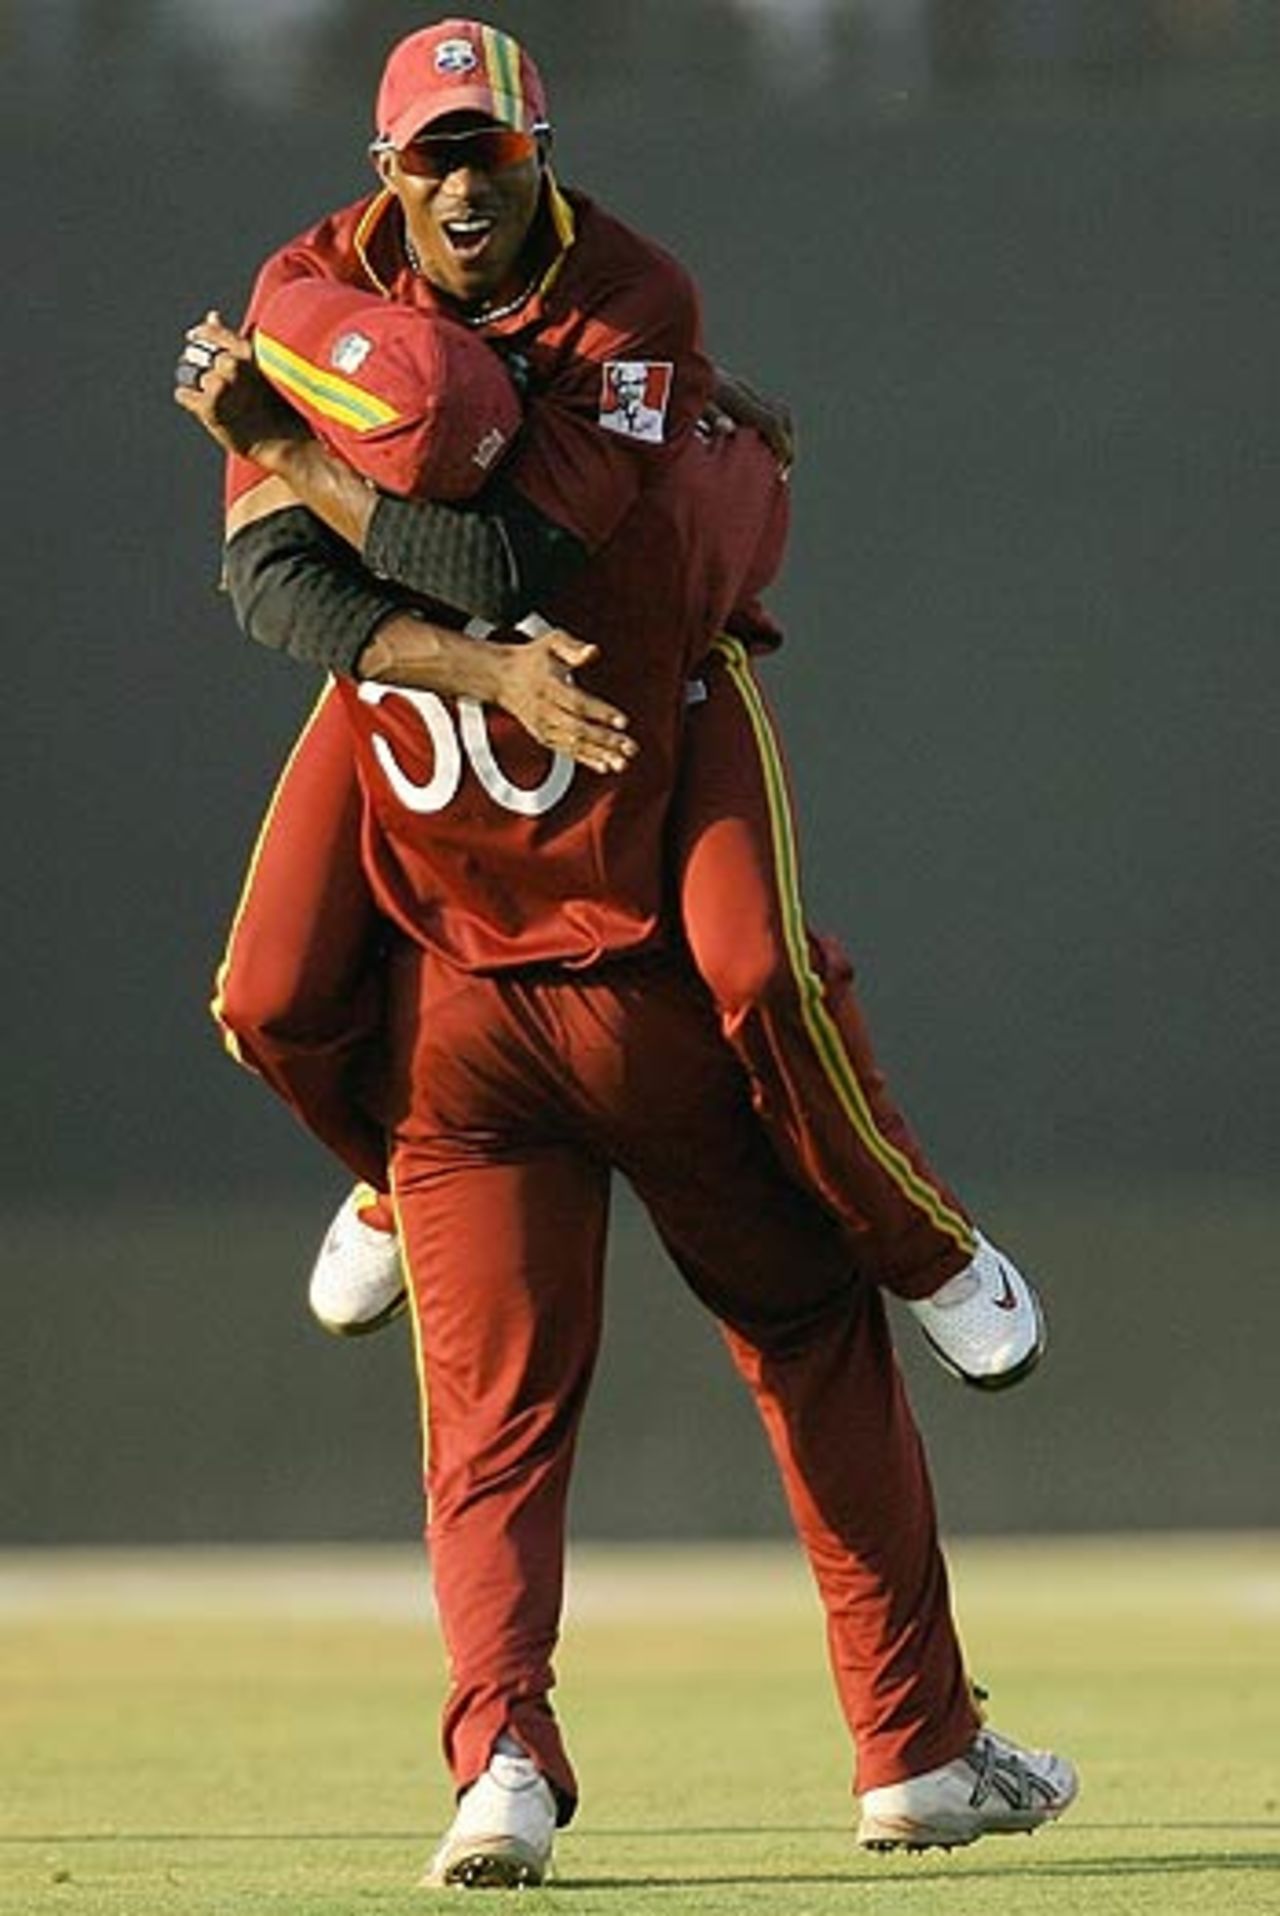 The two Dwaynes - Smith and Bravo, are overjoyed after Rahul Dravid's run out, 9th match, Champions Trophy, Ahmedabad, October 26, 2006